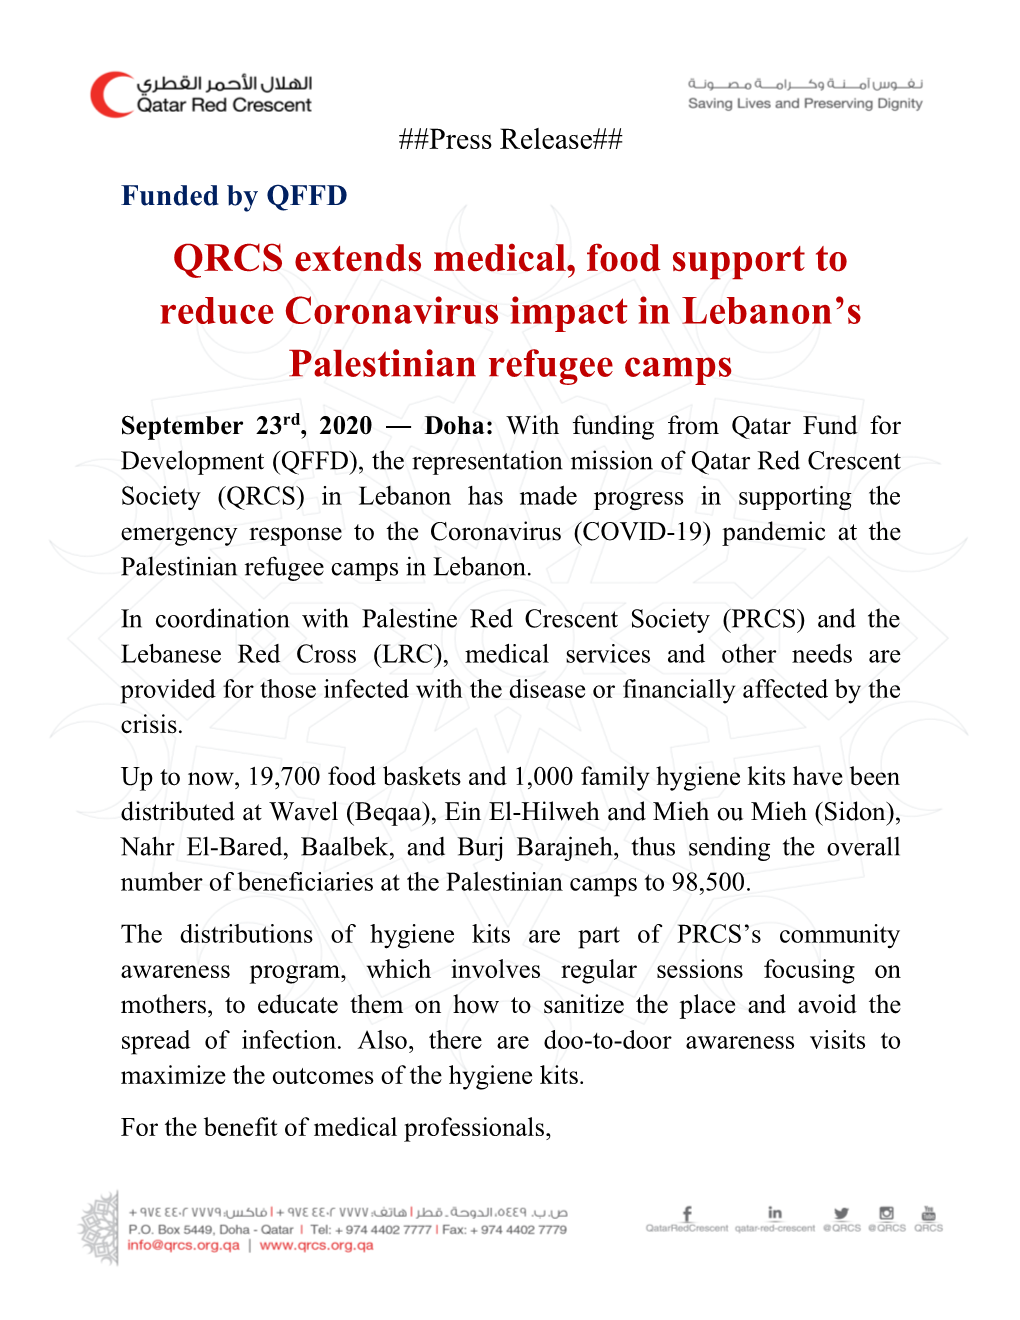 QRCS Extends Medical, Food Support to Reduce Coronavirus Impact in Lebanon's Palestinian Refugee Camps